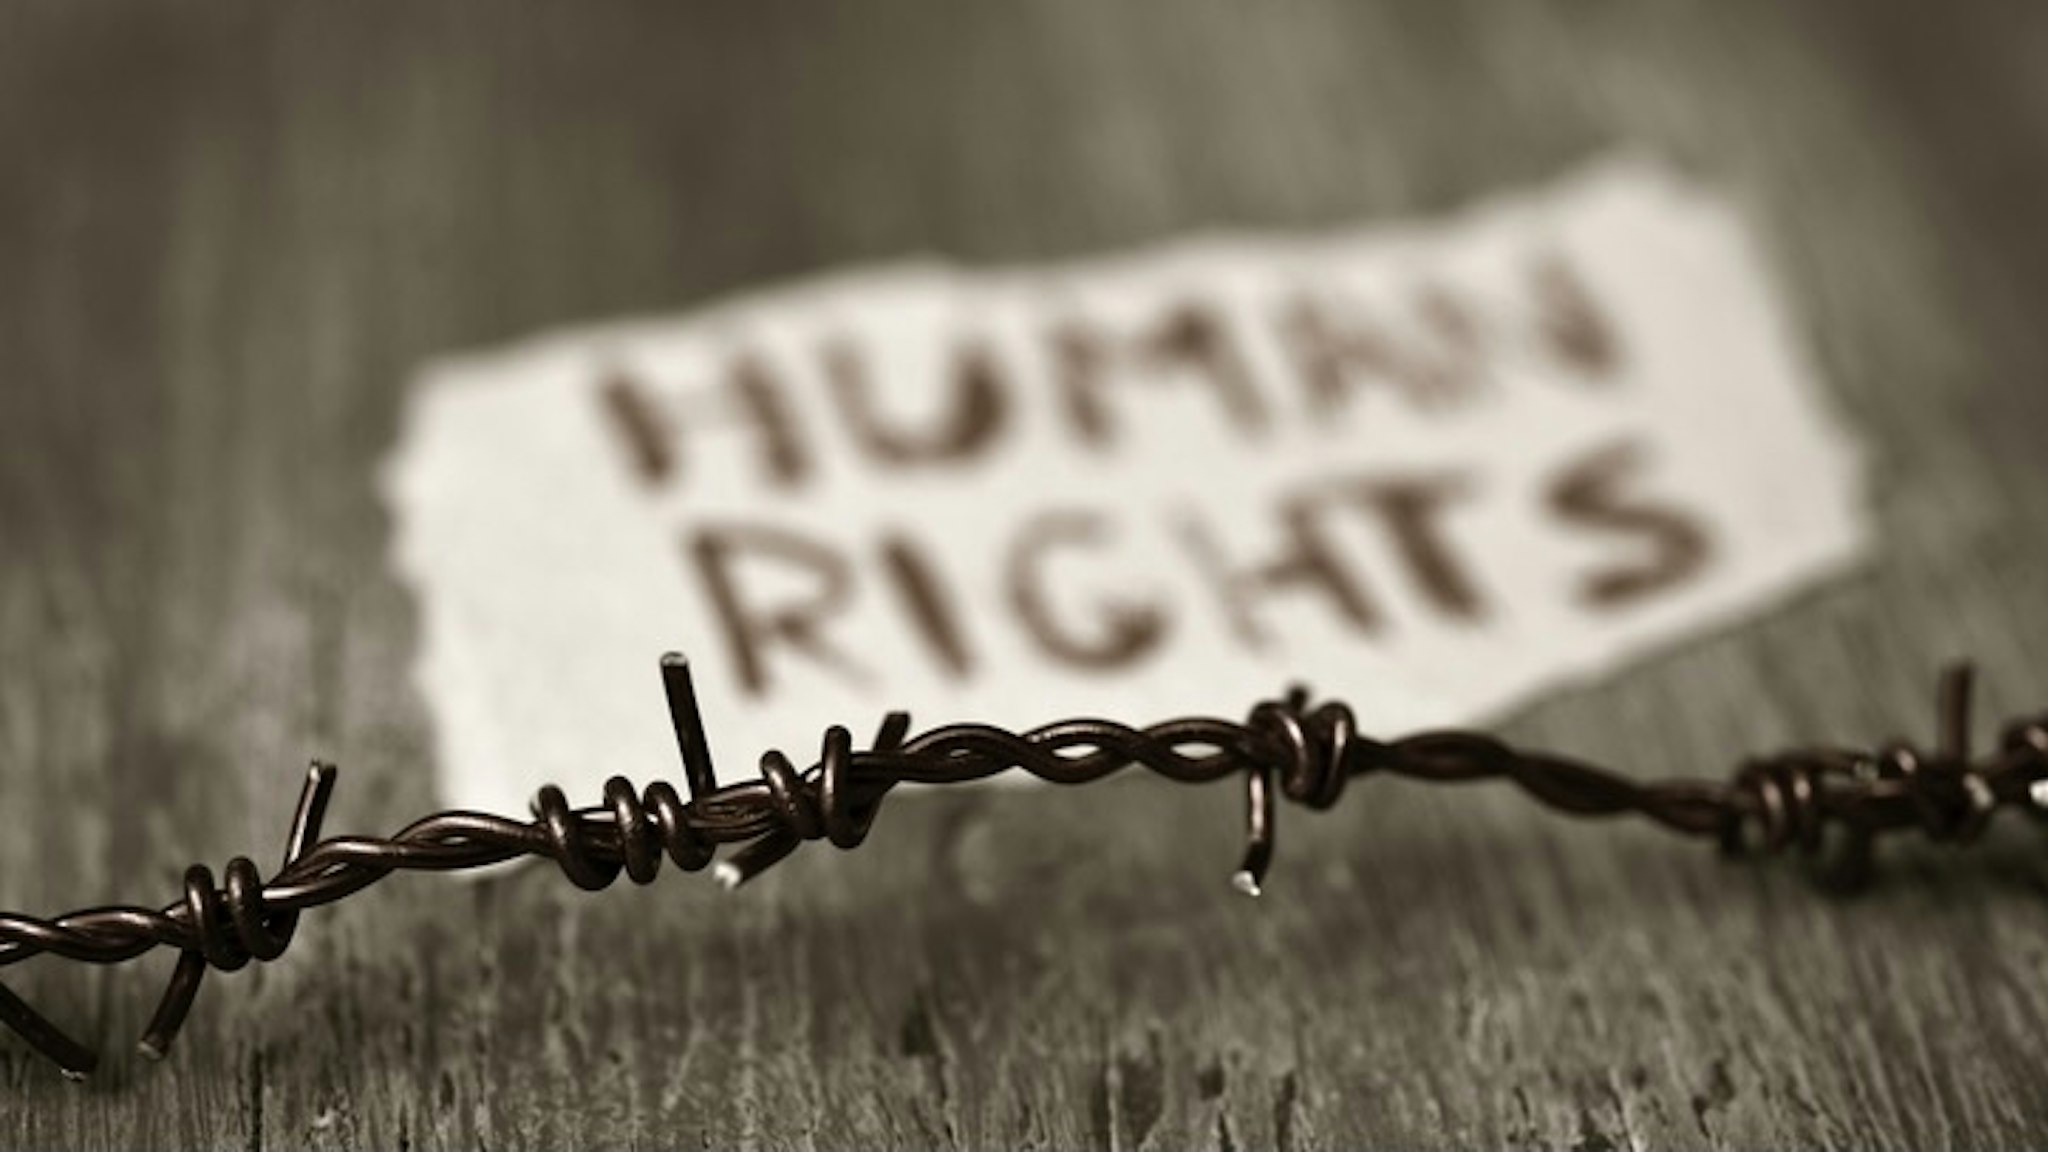 barbed wire and text human rights - stock photo closeup of a barbed wire and a piece of paper with the text human rights handwritten in it on a rustic wooden surface nito100 via Getty Images